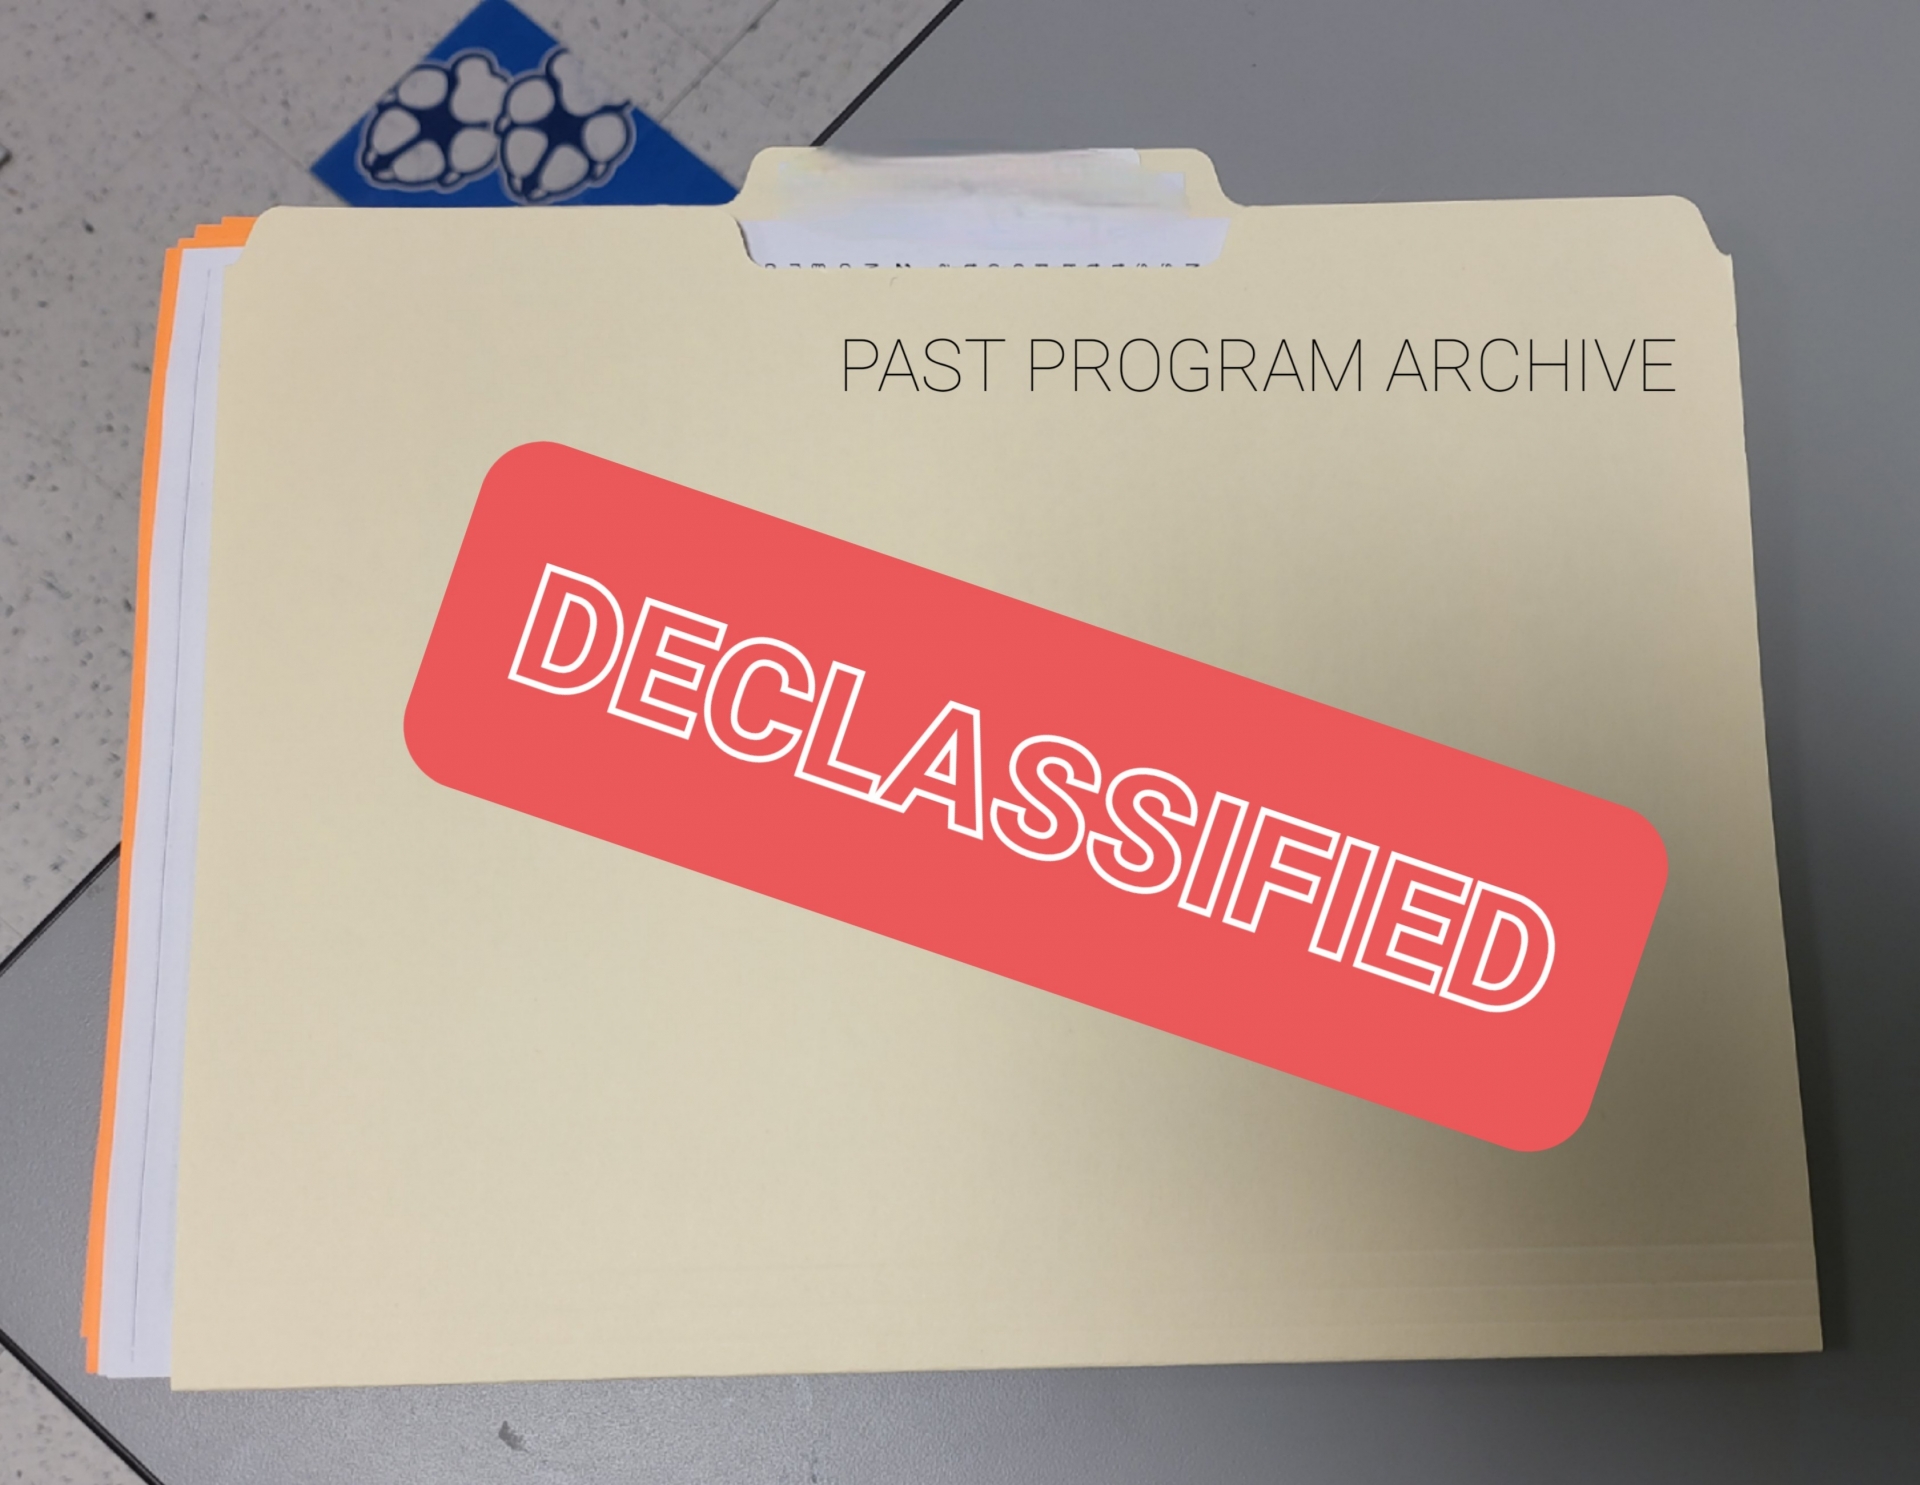 A photo of a manilla folder with the words "Past programs archive" and "Declassified" on it